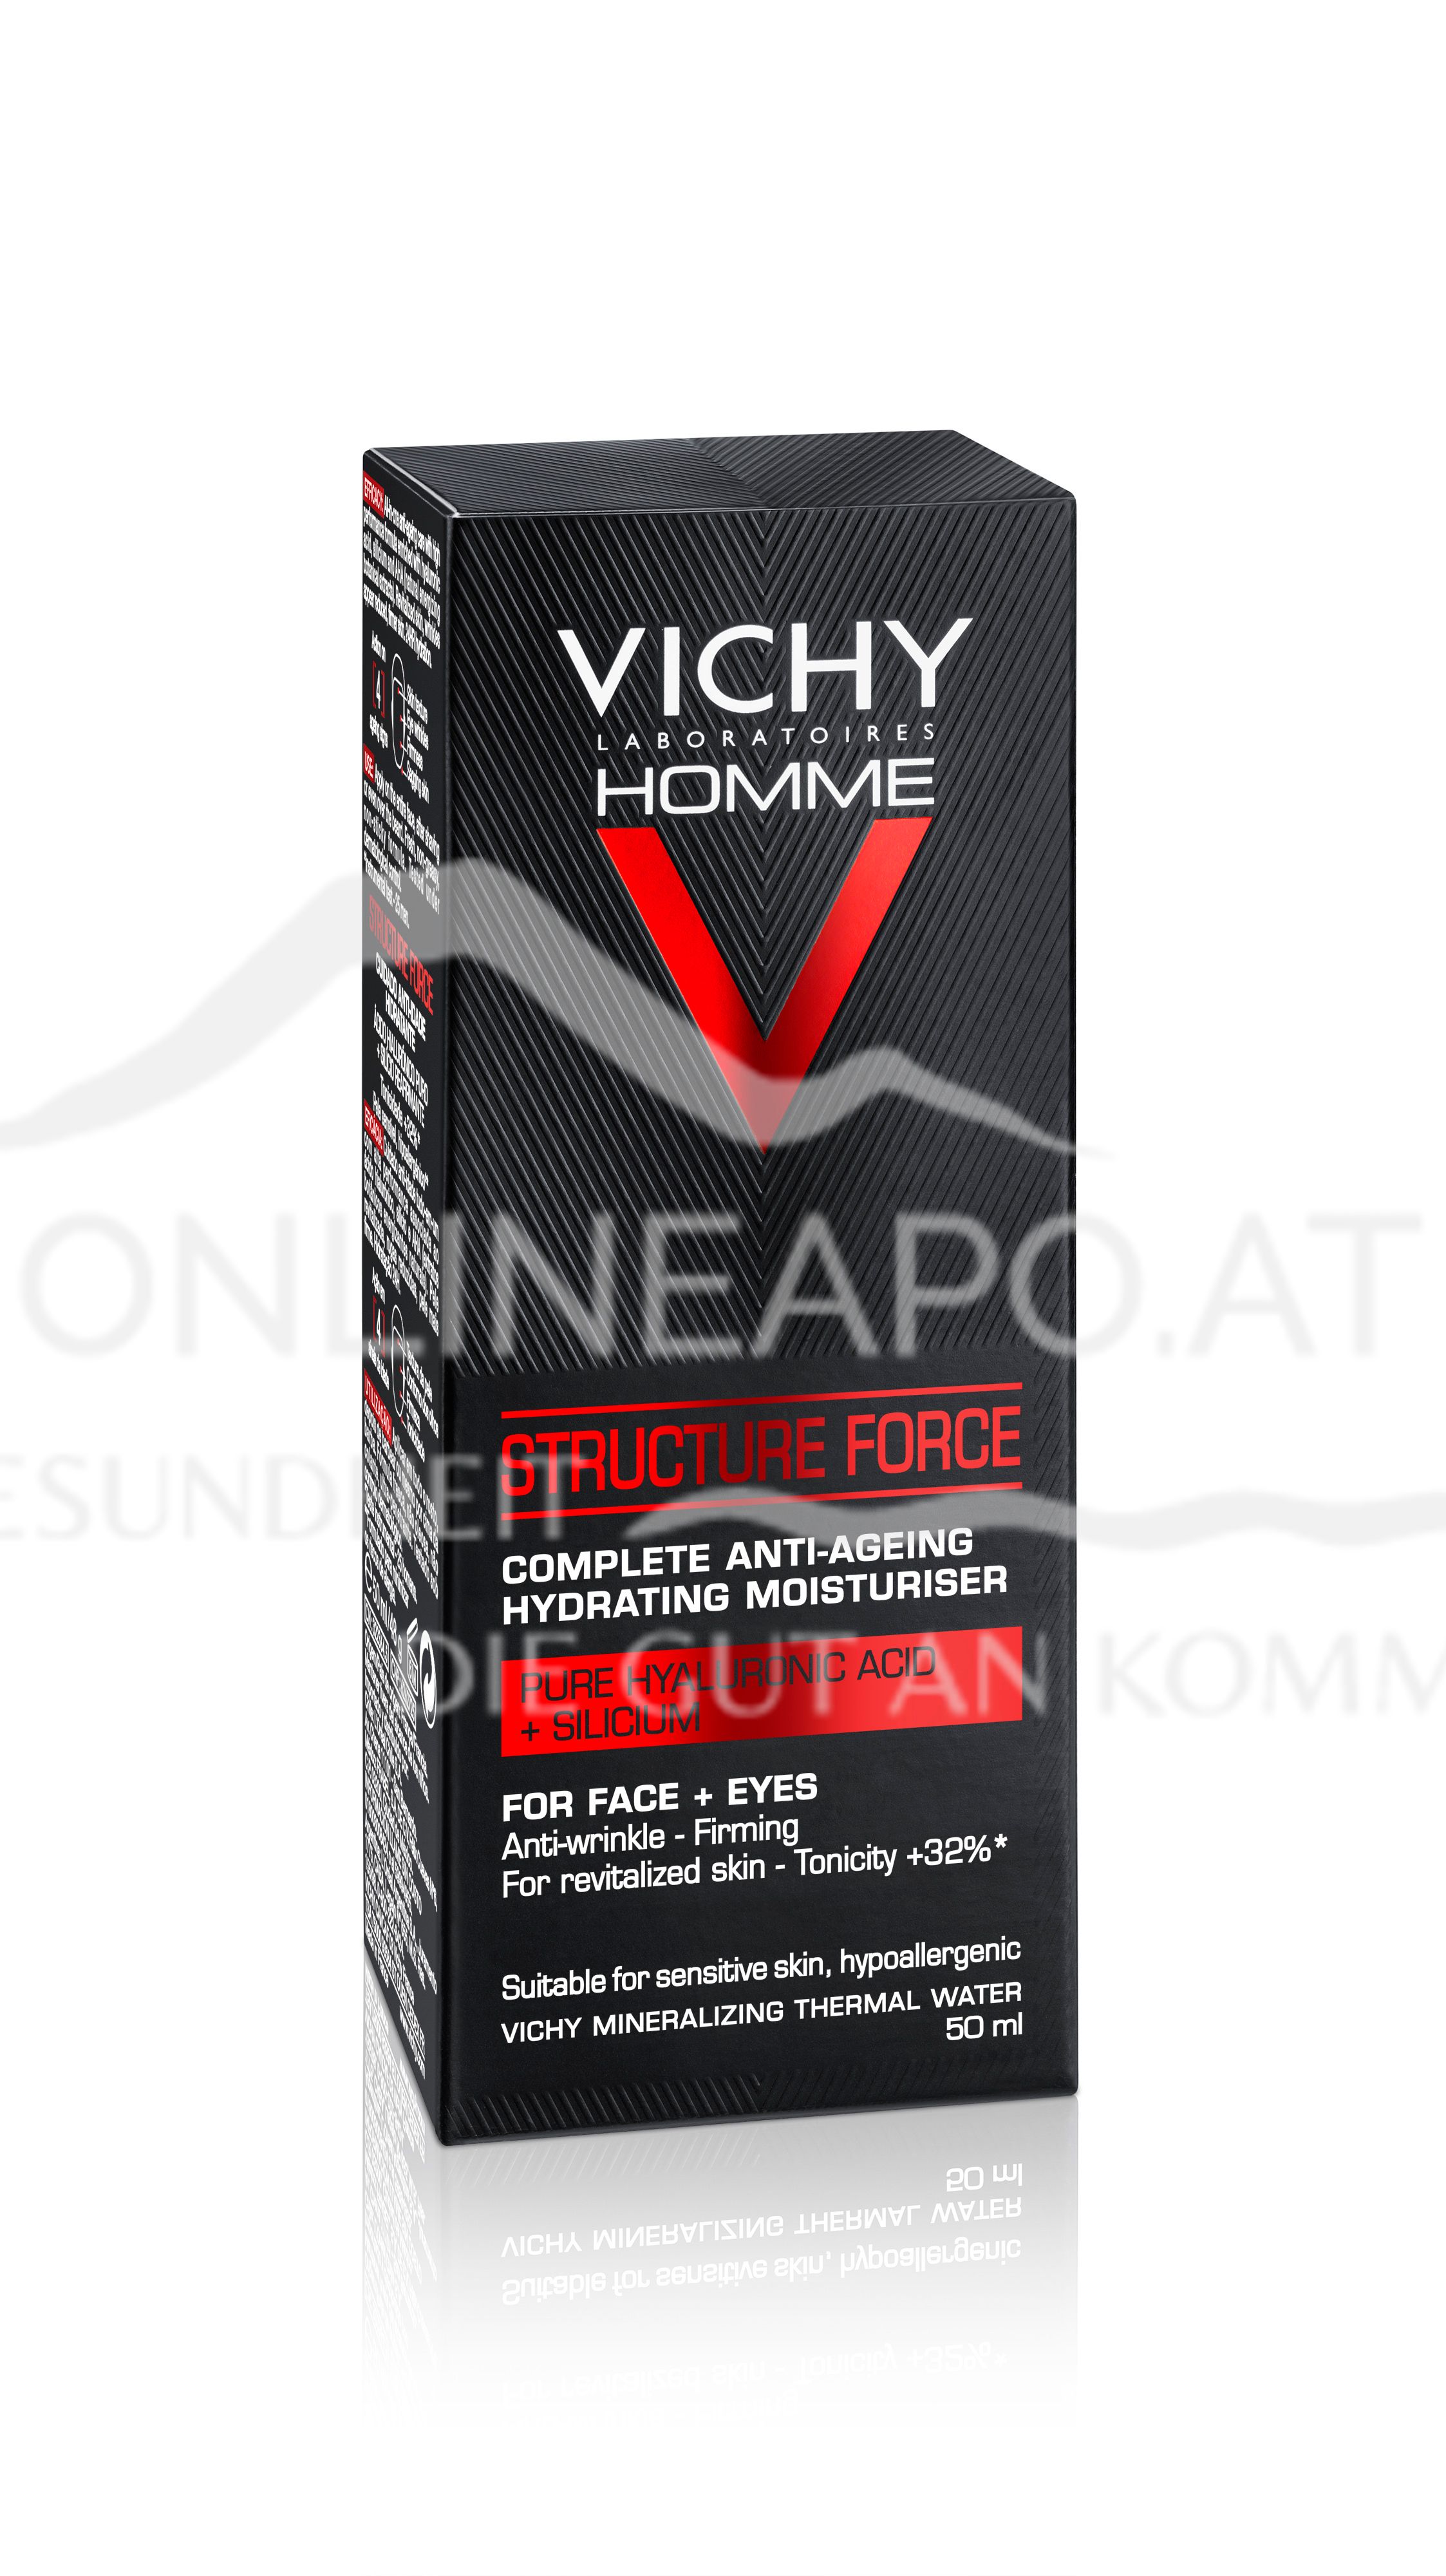 VICHY Homme Structure Force Care